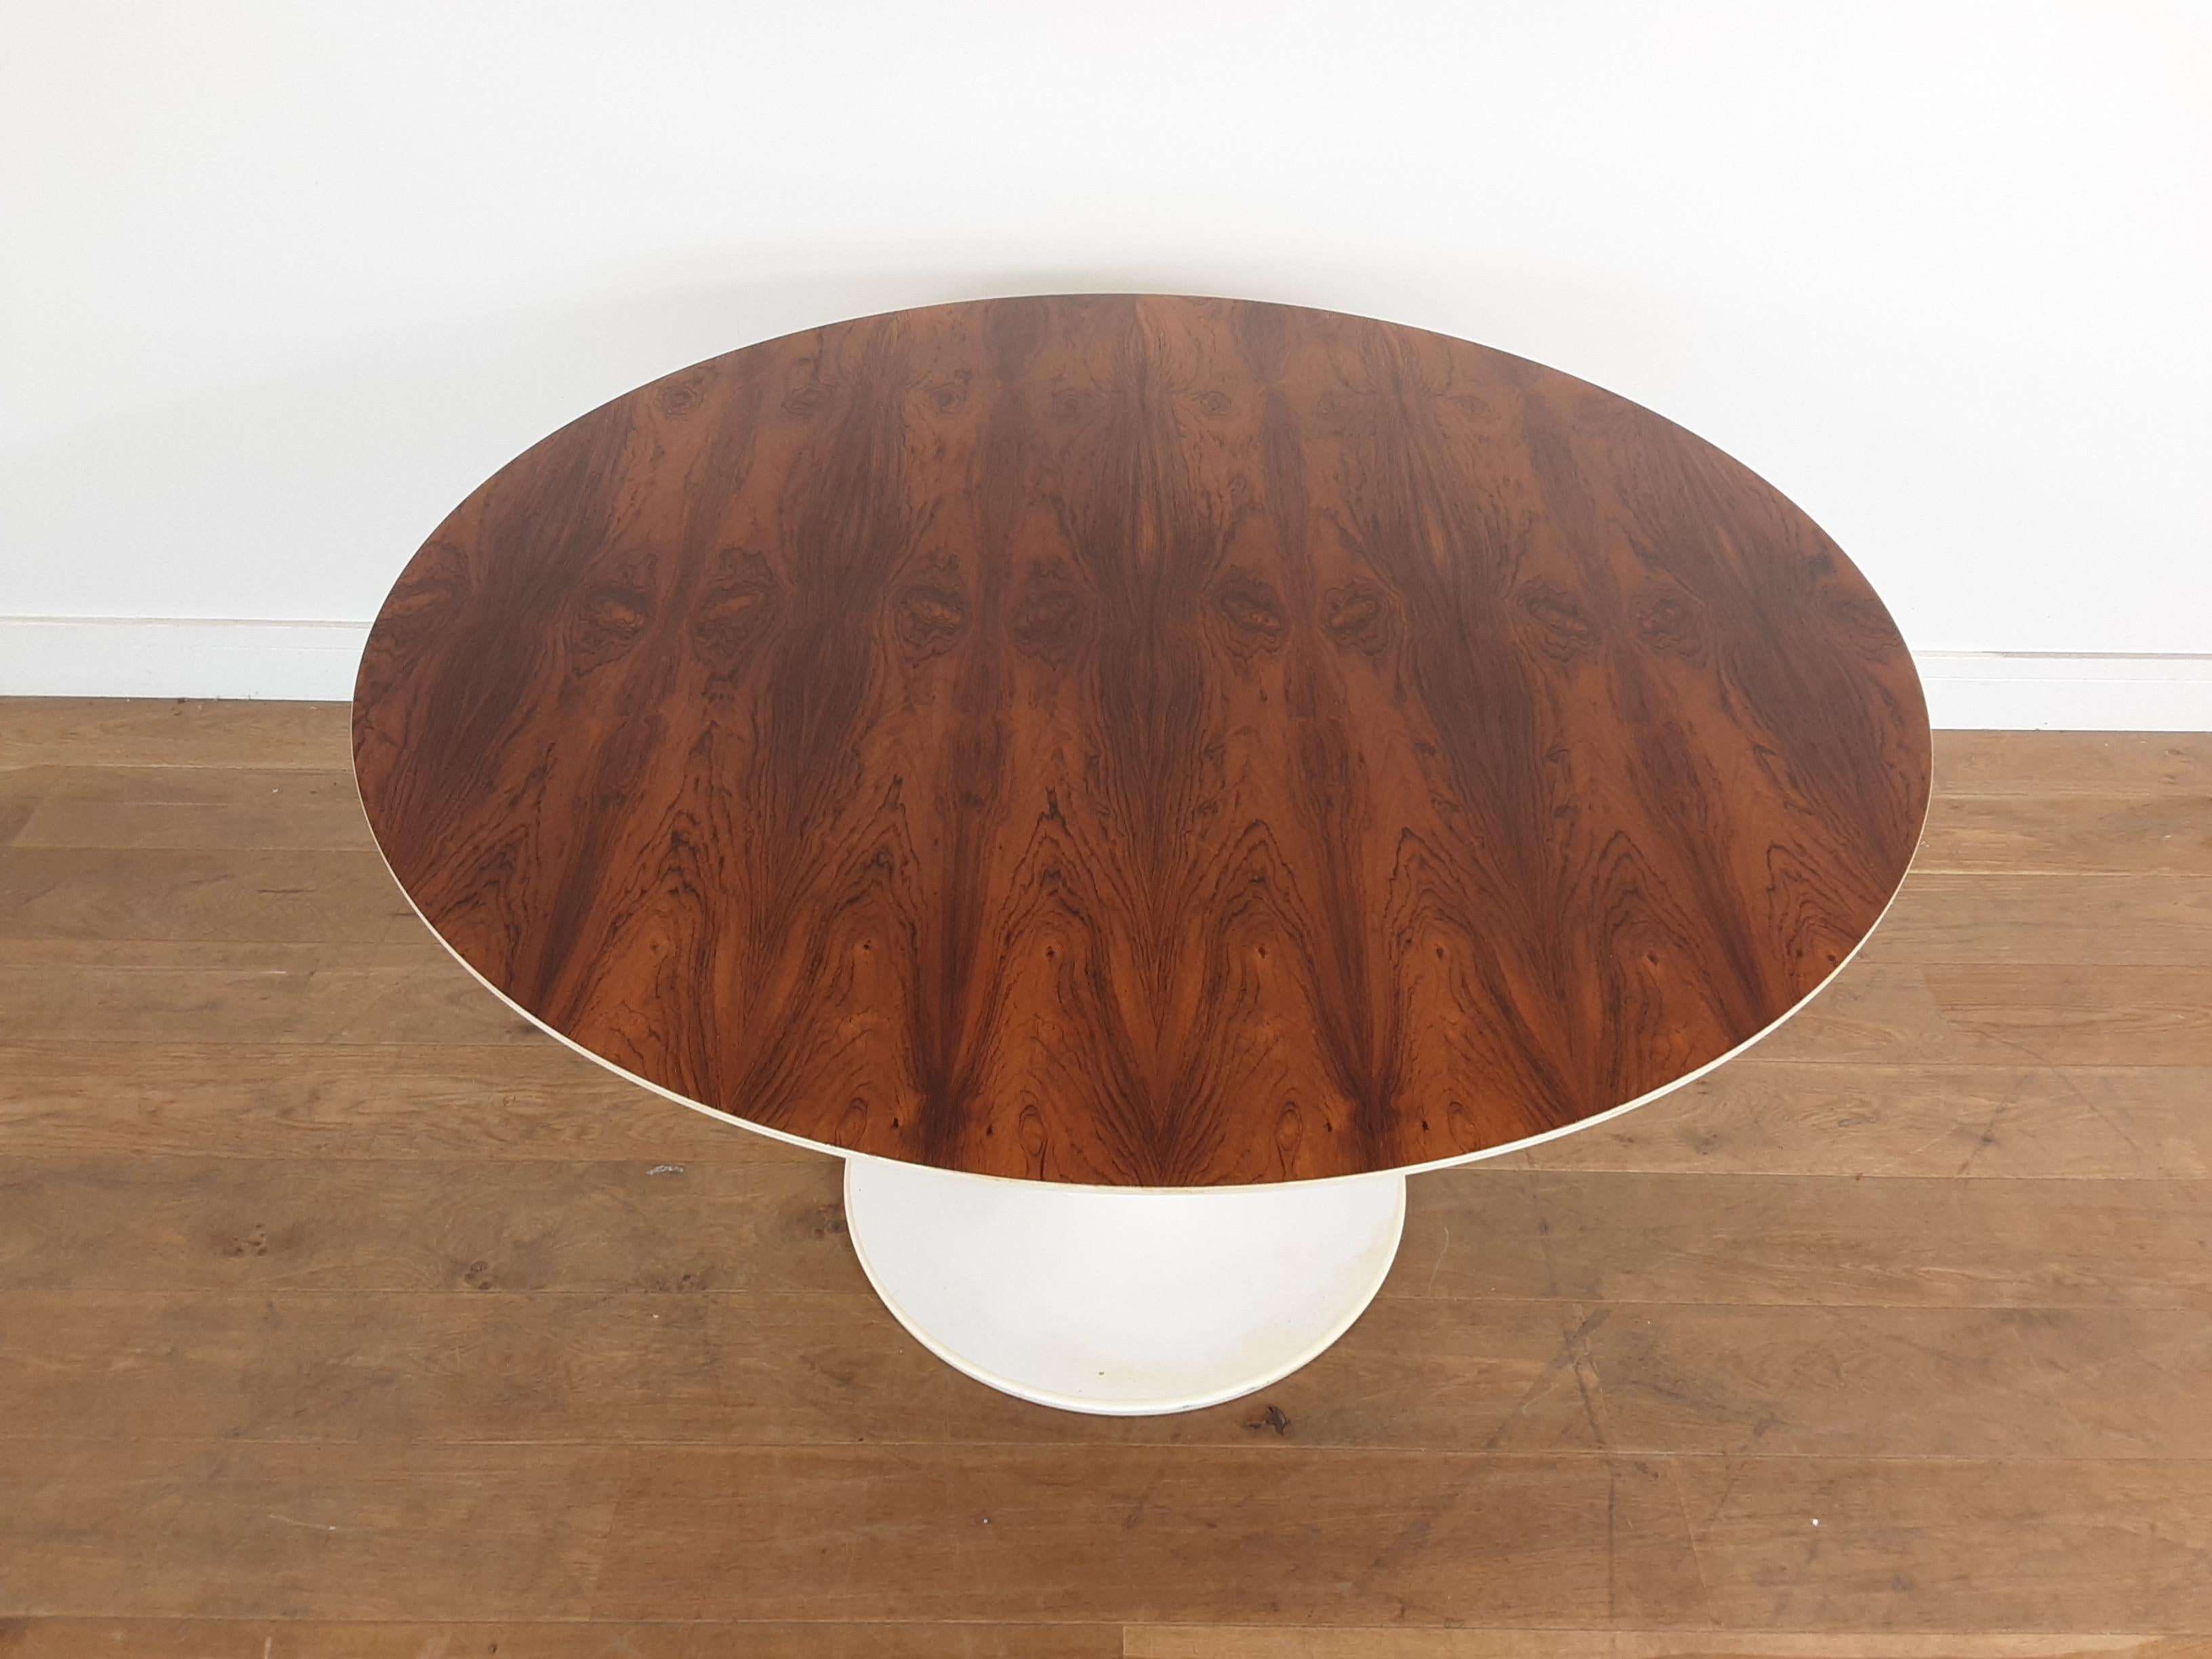 British Midcentury Rosewood Tulip Table In Good Condition For Sale In London, GB